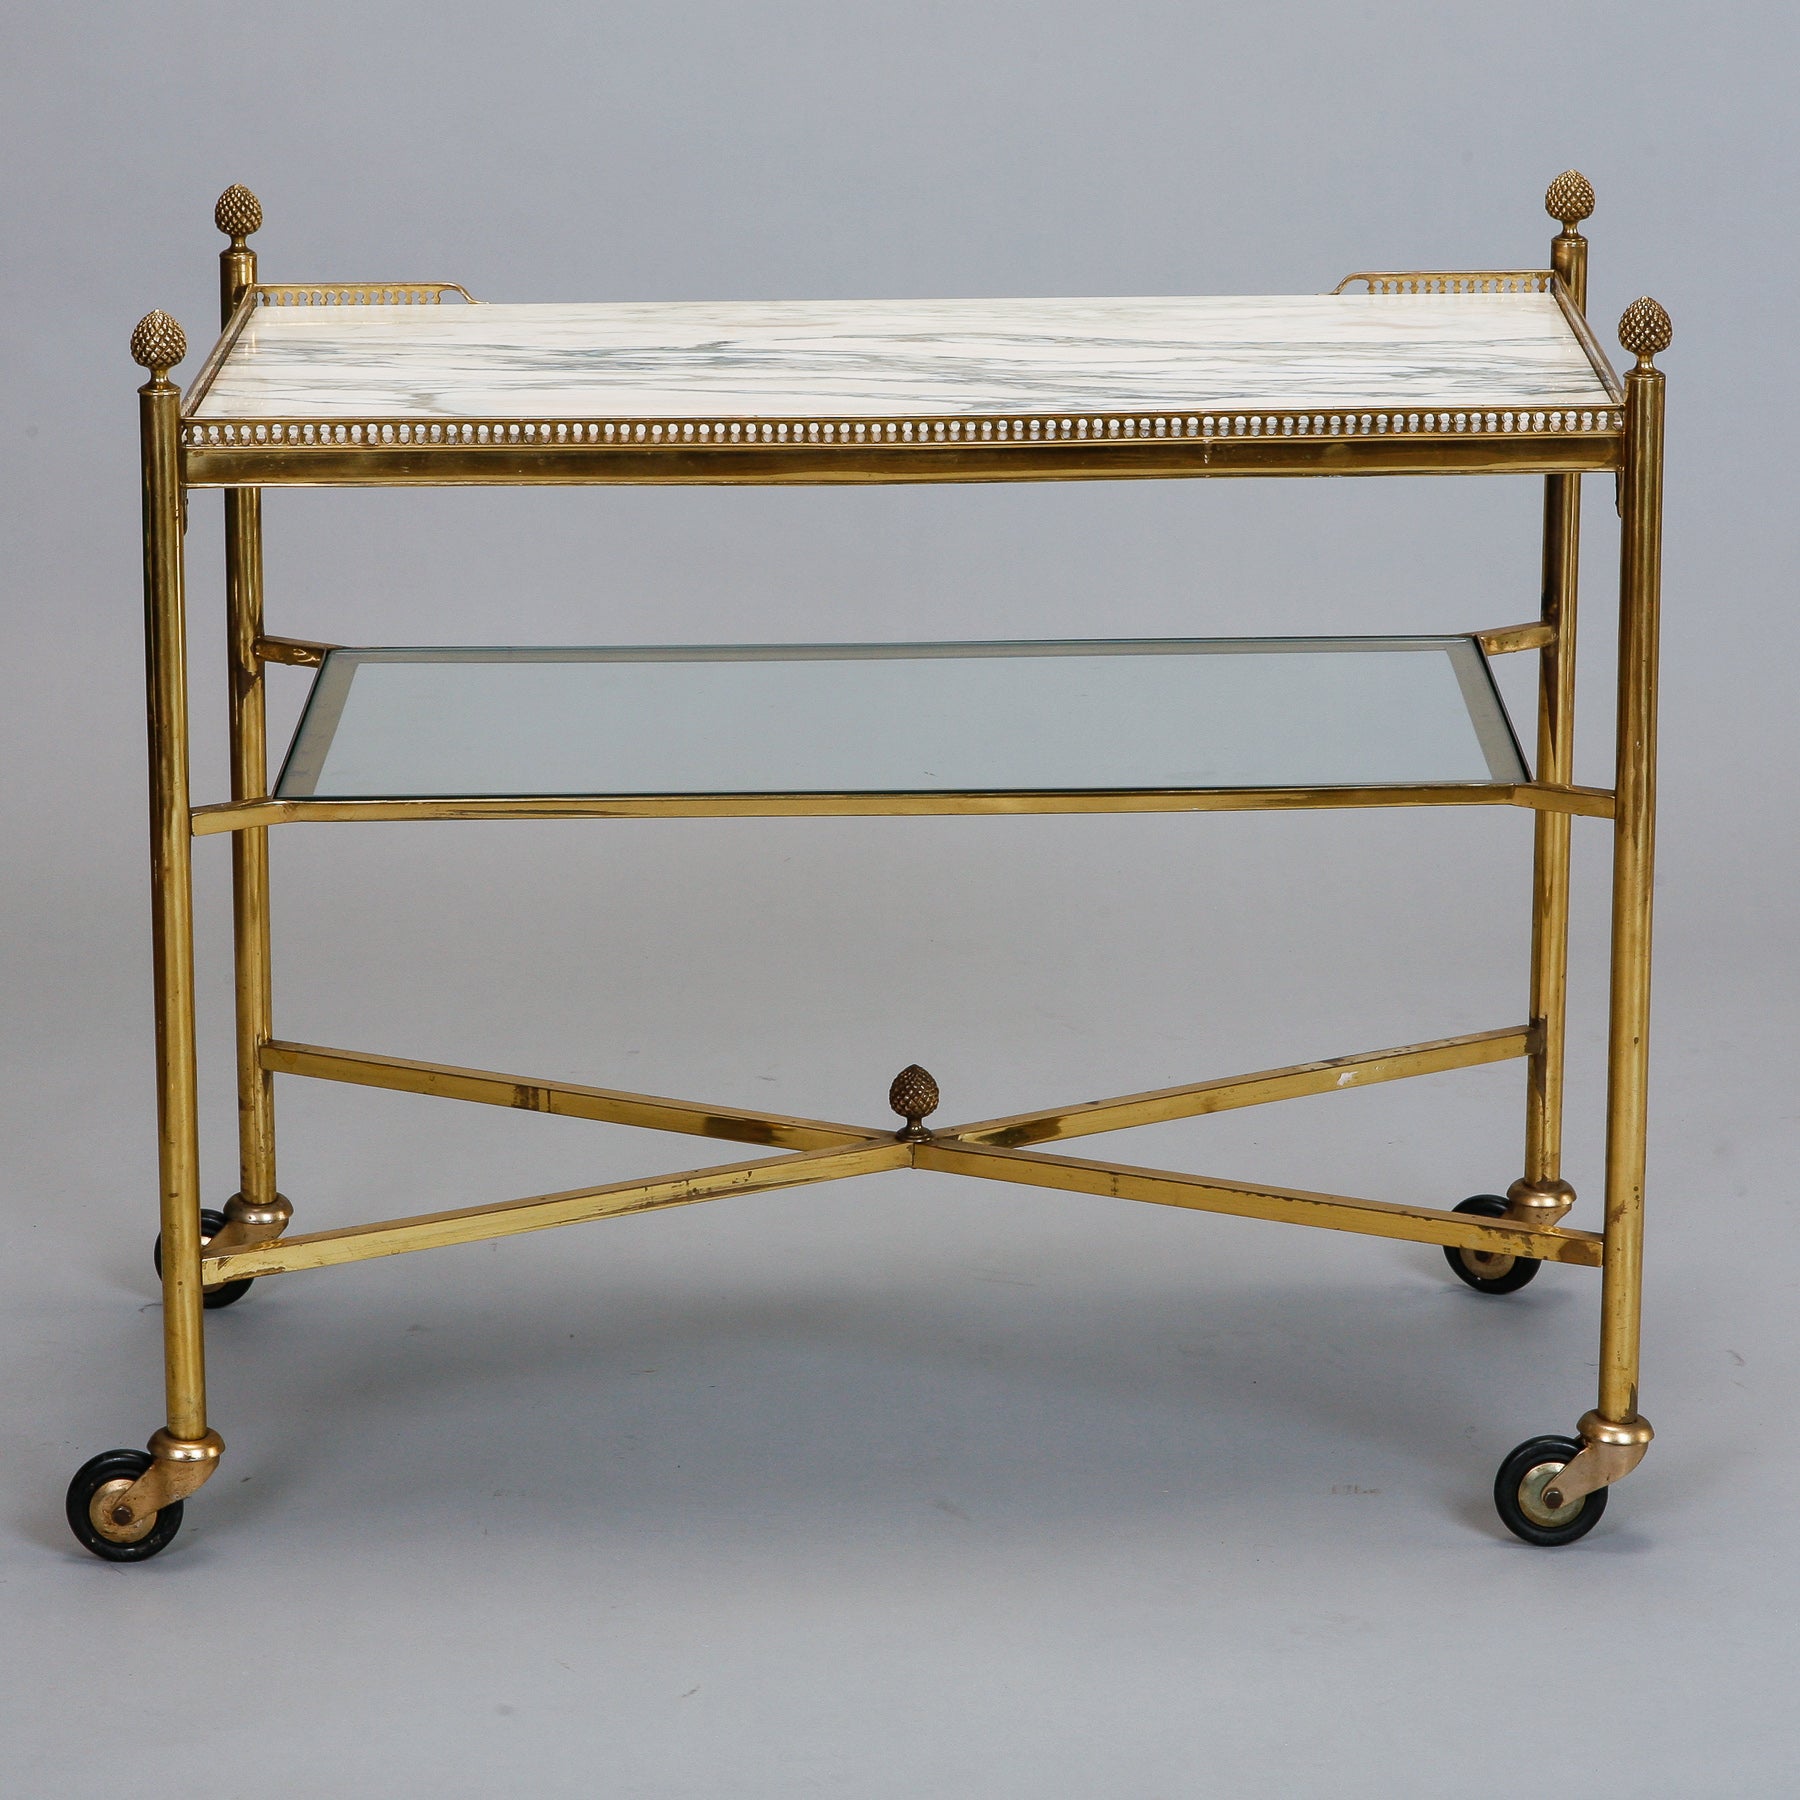 Italian Brass and Marble Trolley Table with Pineapple Finials